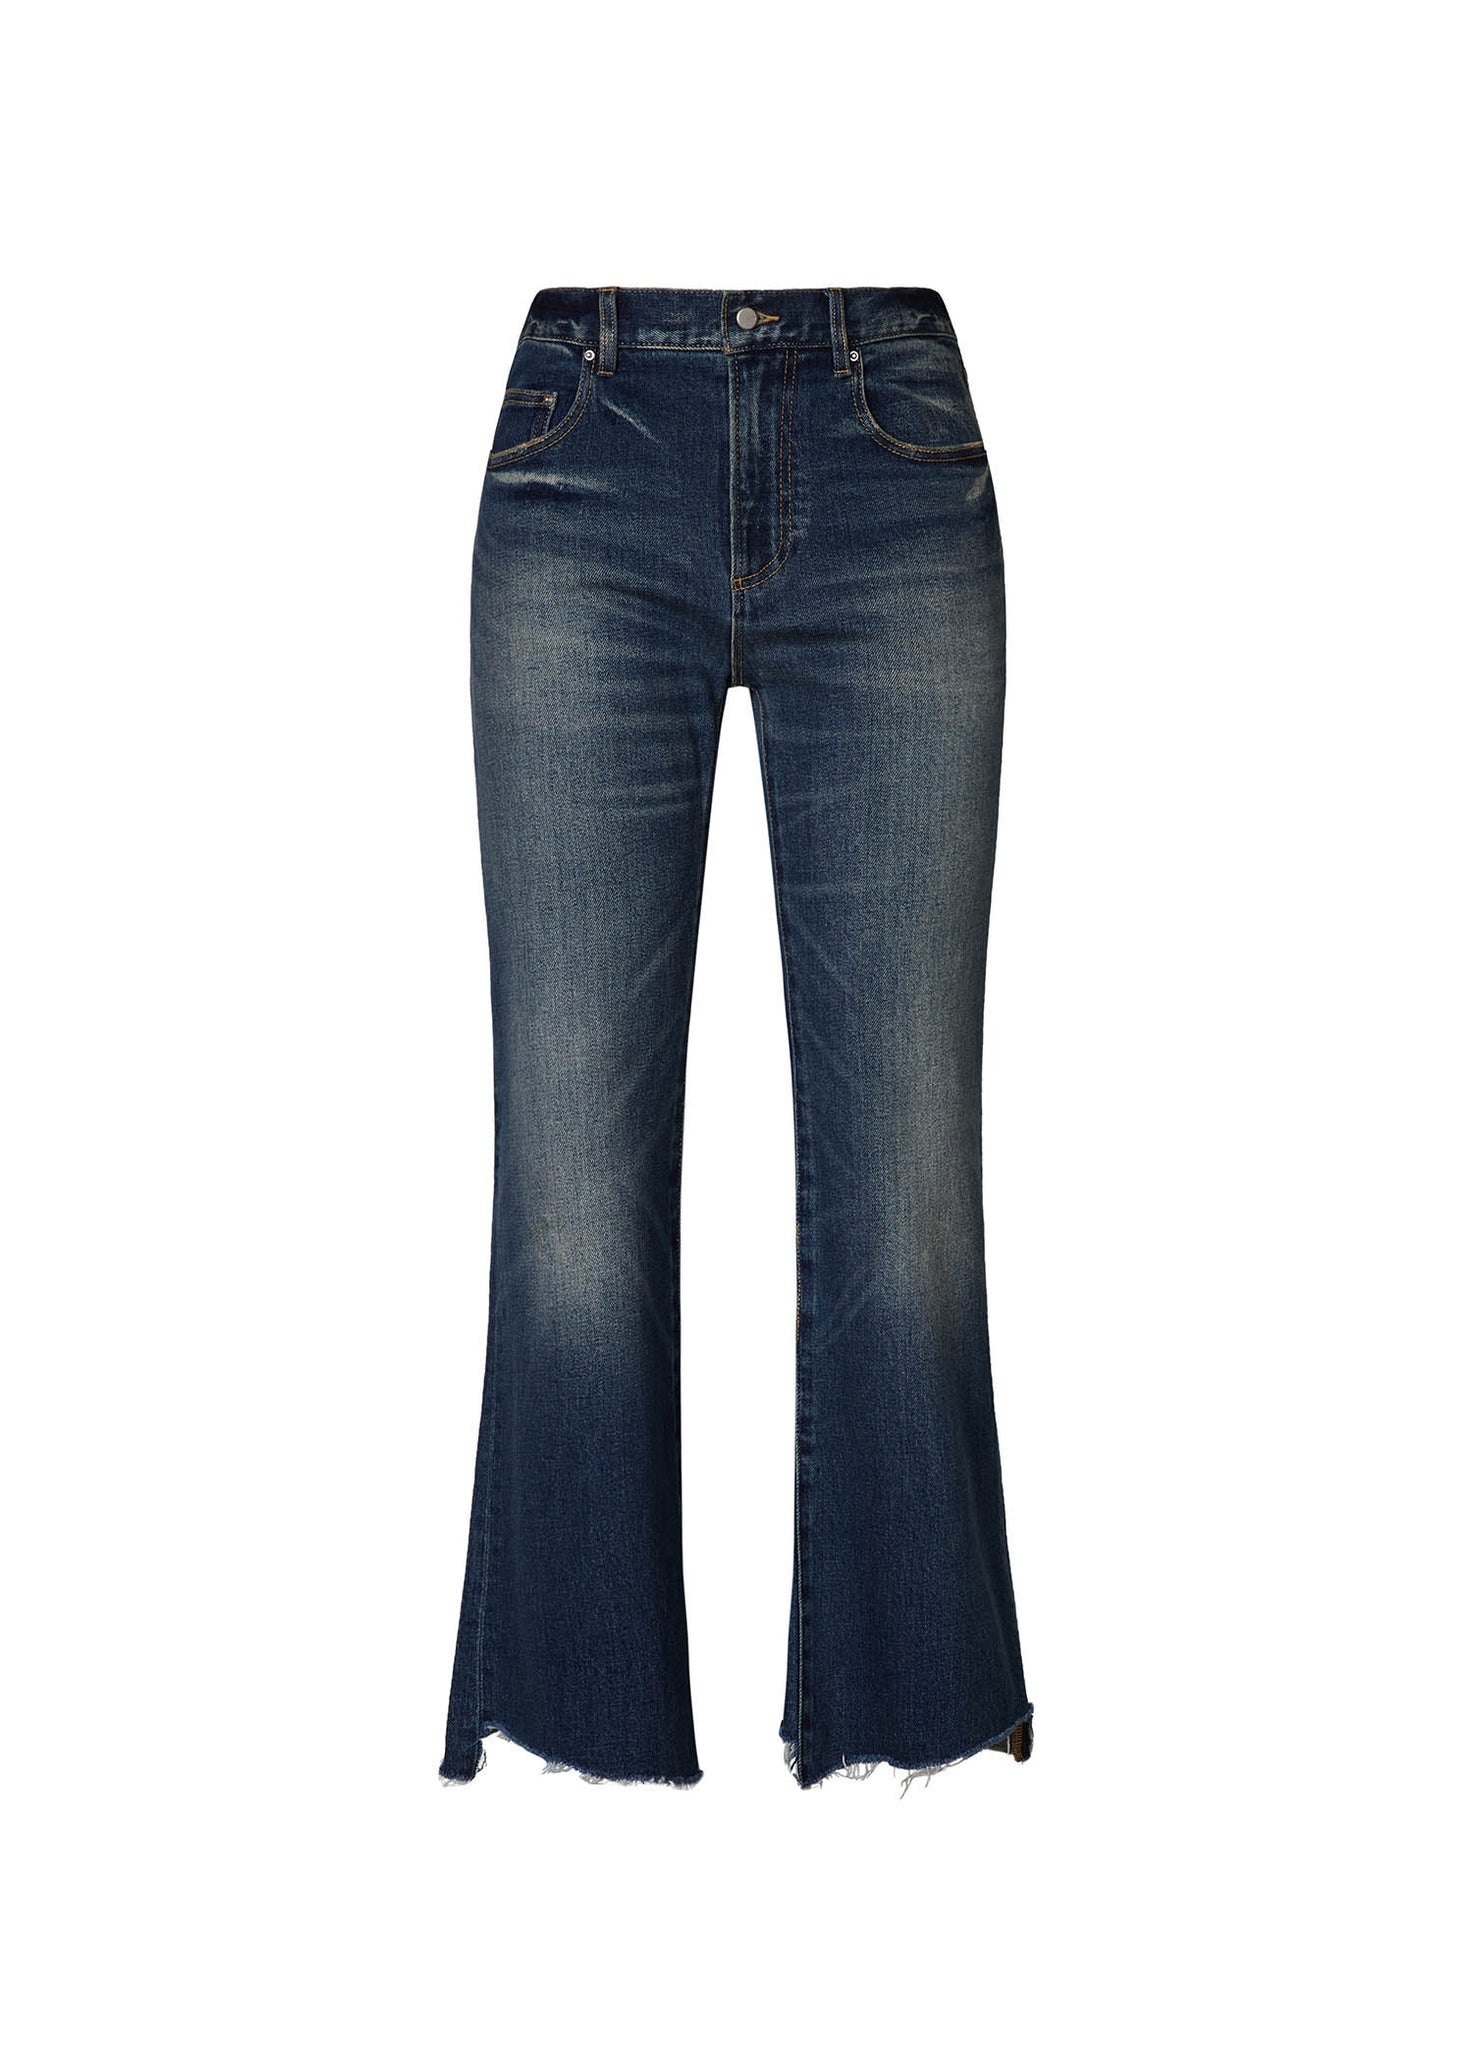 Jeans / JNBY Washed Slim Fit Flare Jeans